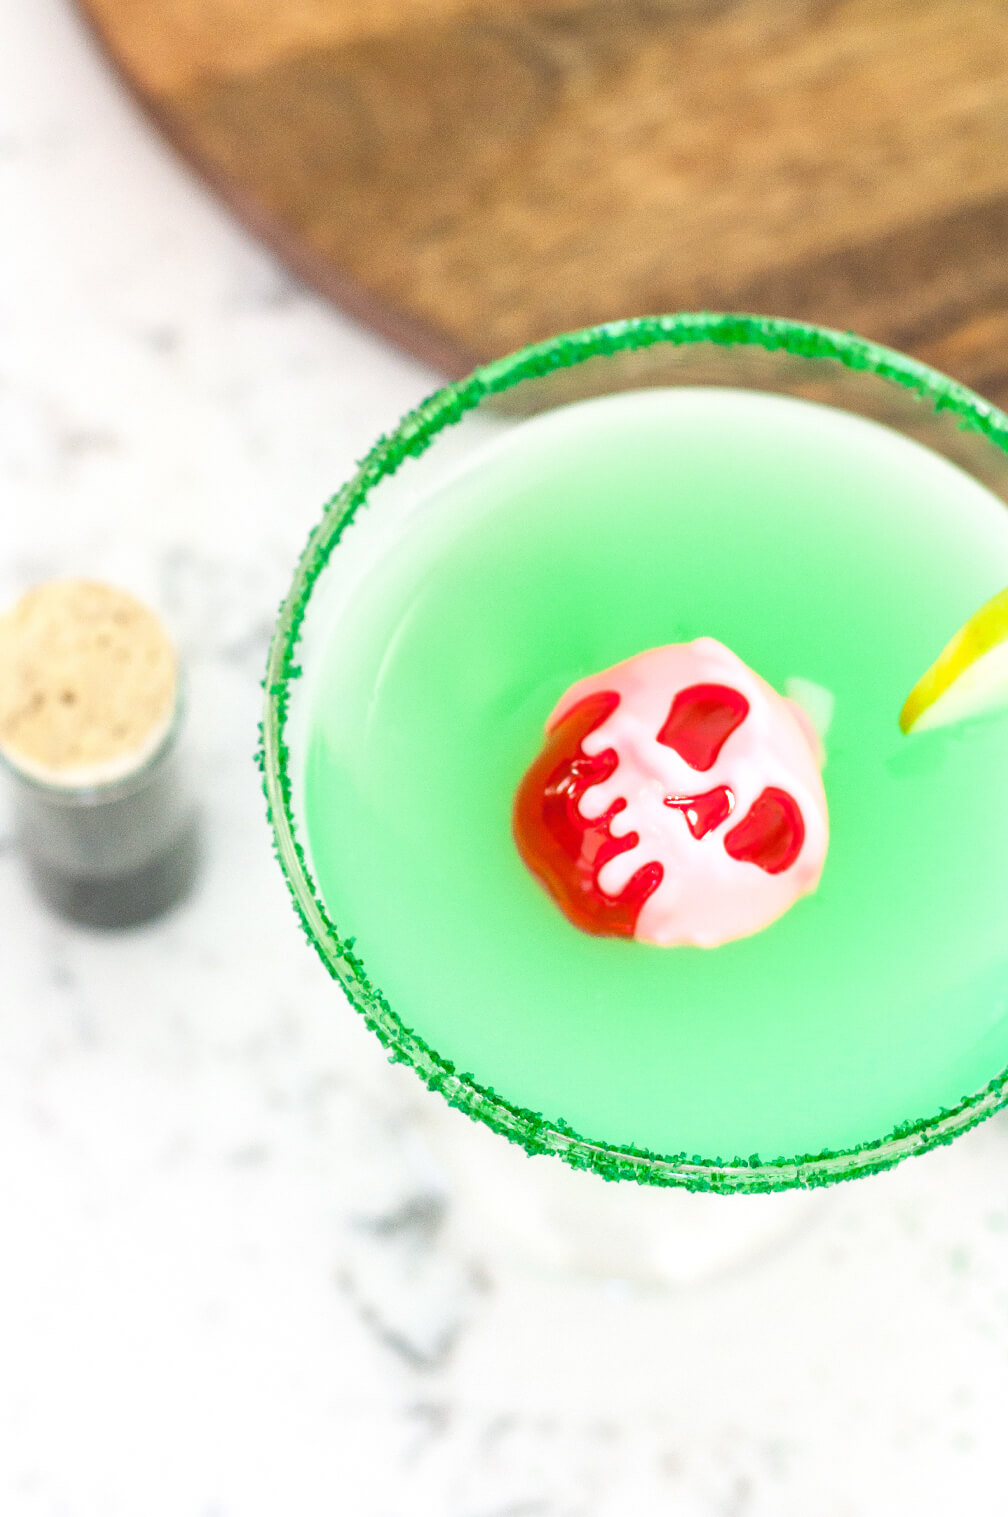 In honor of the first ever animated movie Snow White, I created the Evil Queens Poisoned Apple Martini recipe as part of my Disney Cocktails series.